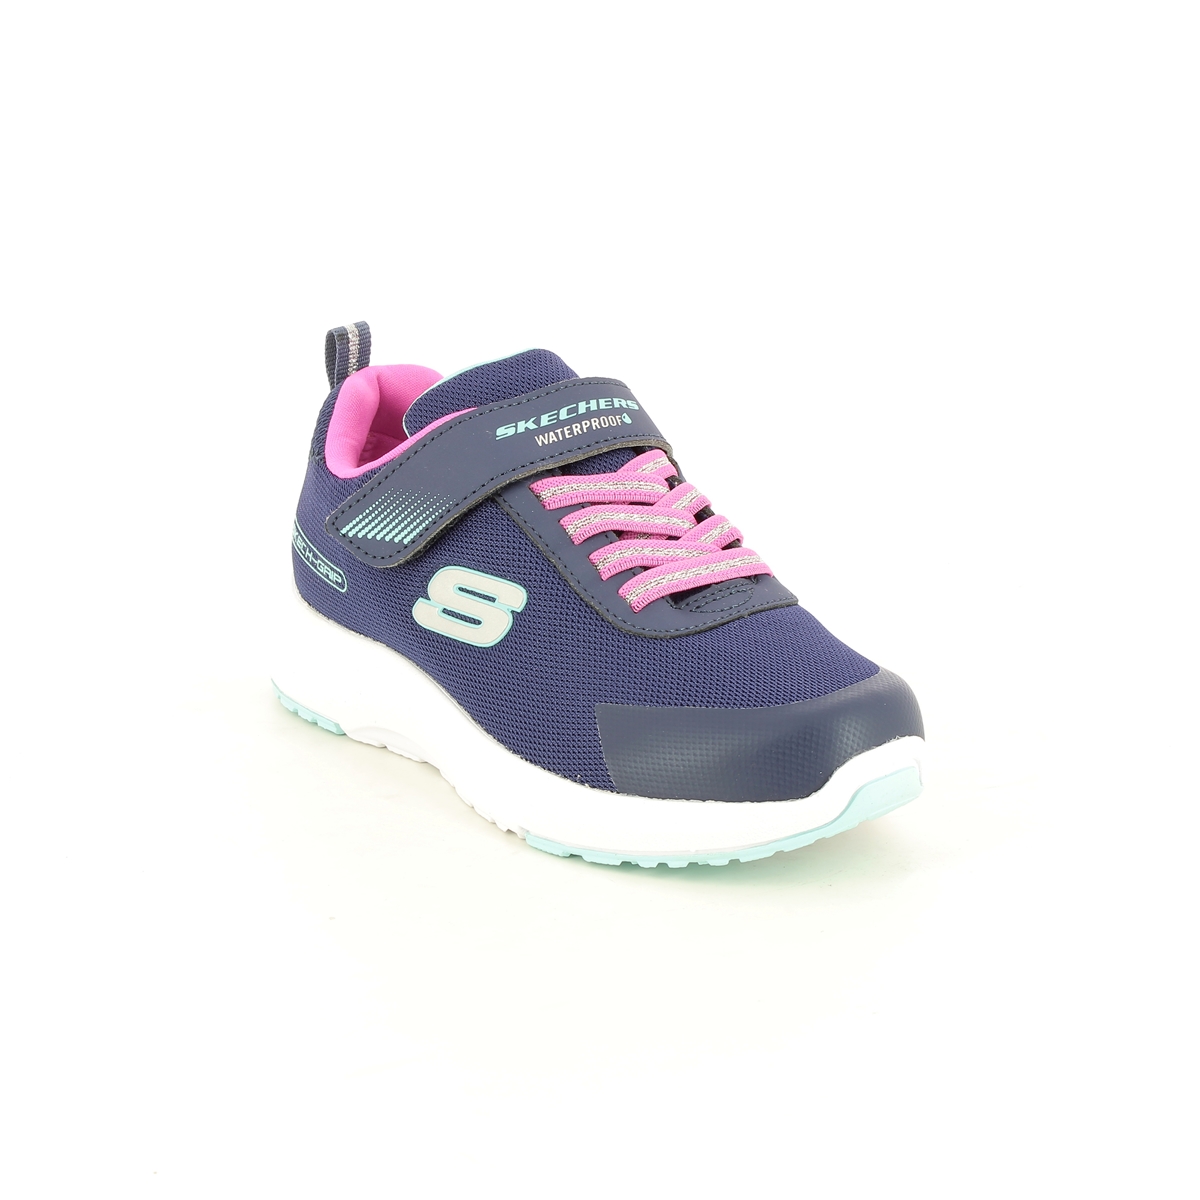 Skechers Dynamic Tex Navy Pink Kids Girls Trainers 302425L In Size 33 In Plain Navy Pink For kids